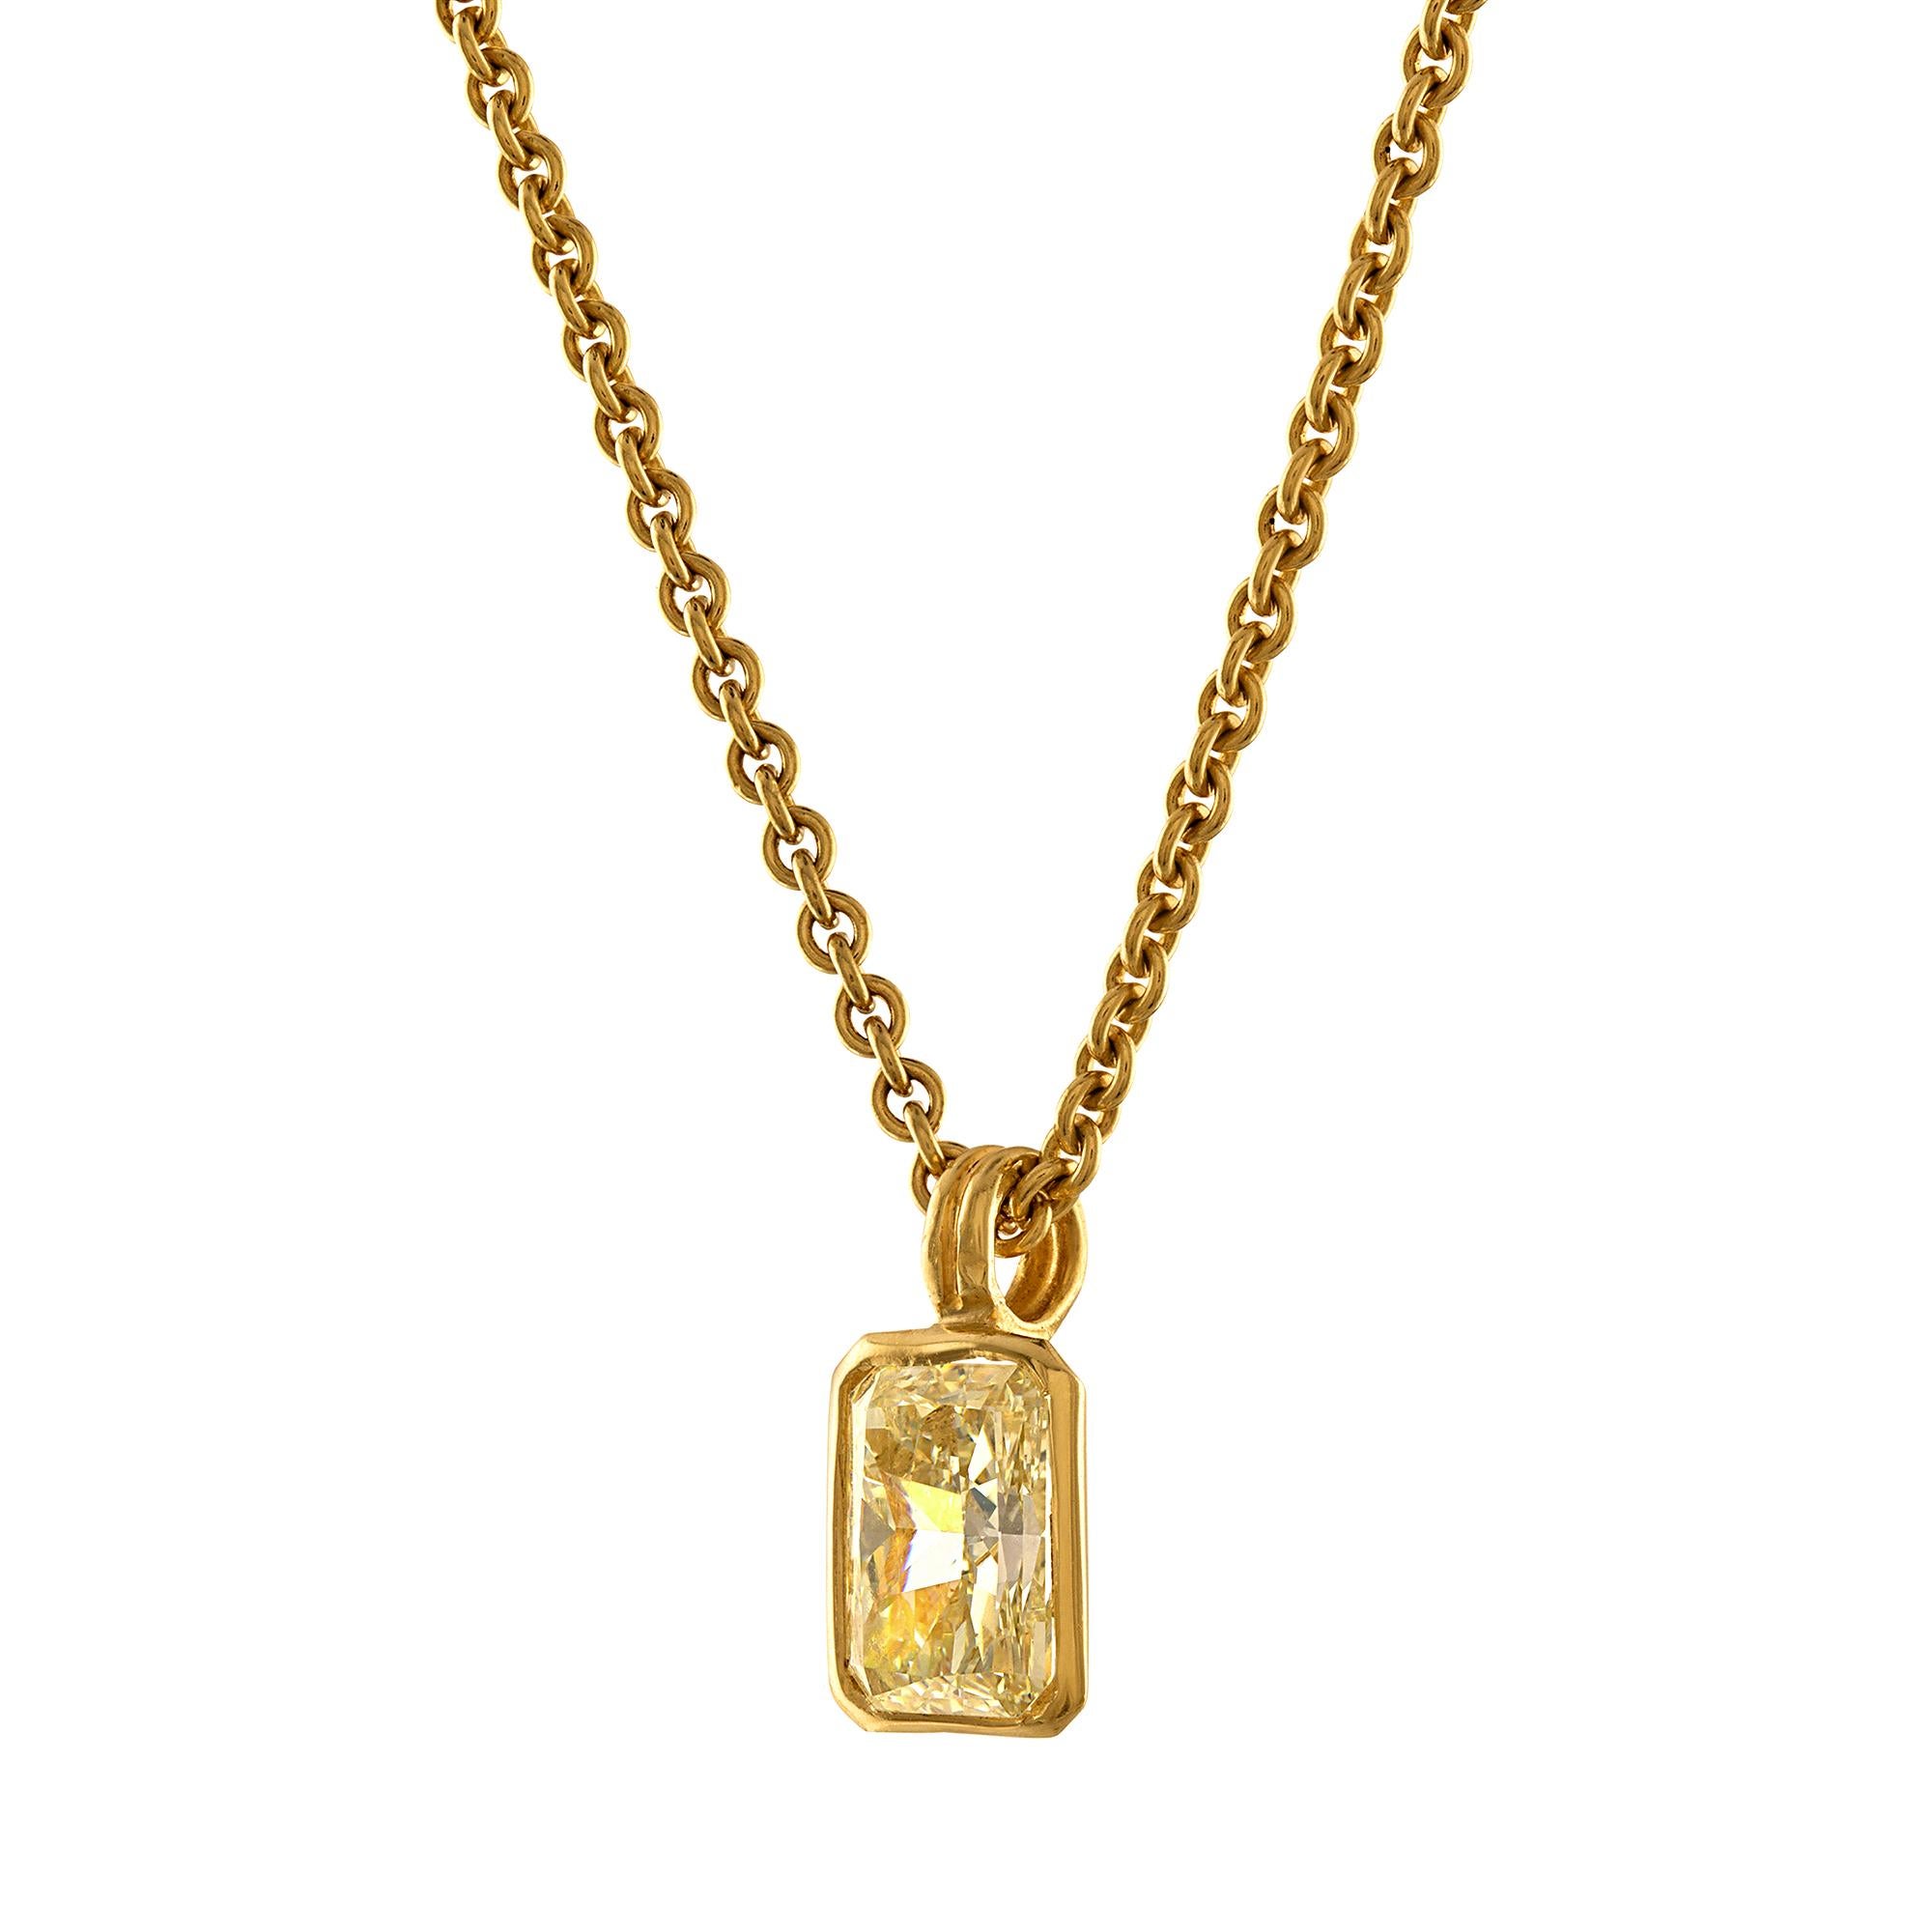 Natural 1.92ct Fancy Yellow Radiant Cut Diamond Bezel Drop Solitaire Gold Pendant Necklace.

Sunshine on your neck !!! Impressive 18k Shy 2.0ct Solitaire Diamond Drop Pendant in Radiant Cut.
One accessory that has never gone out of style is the